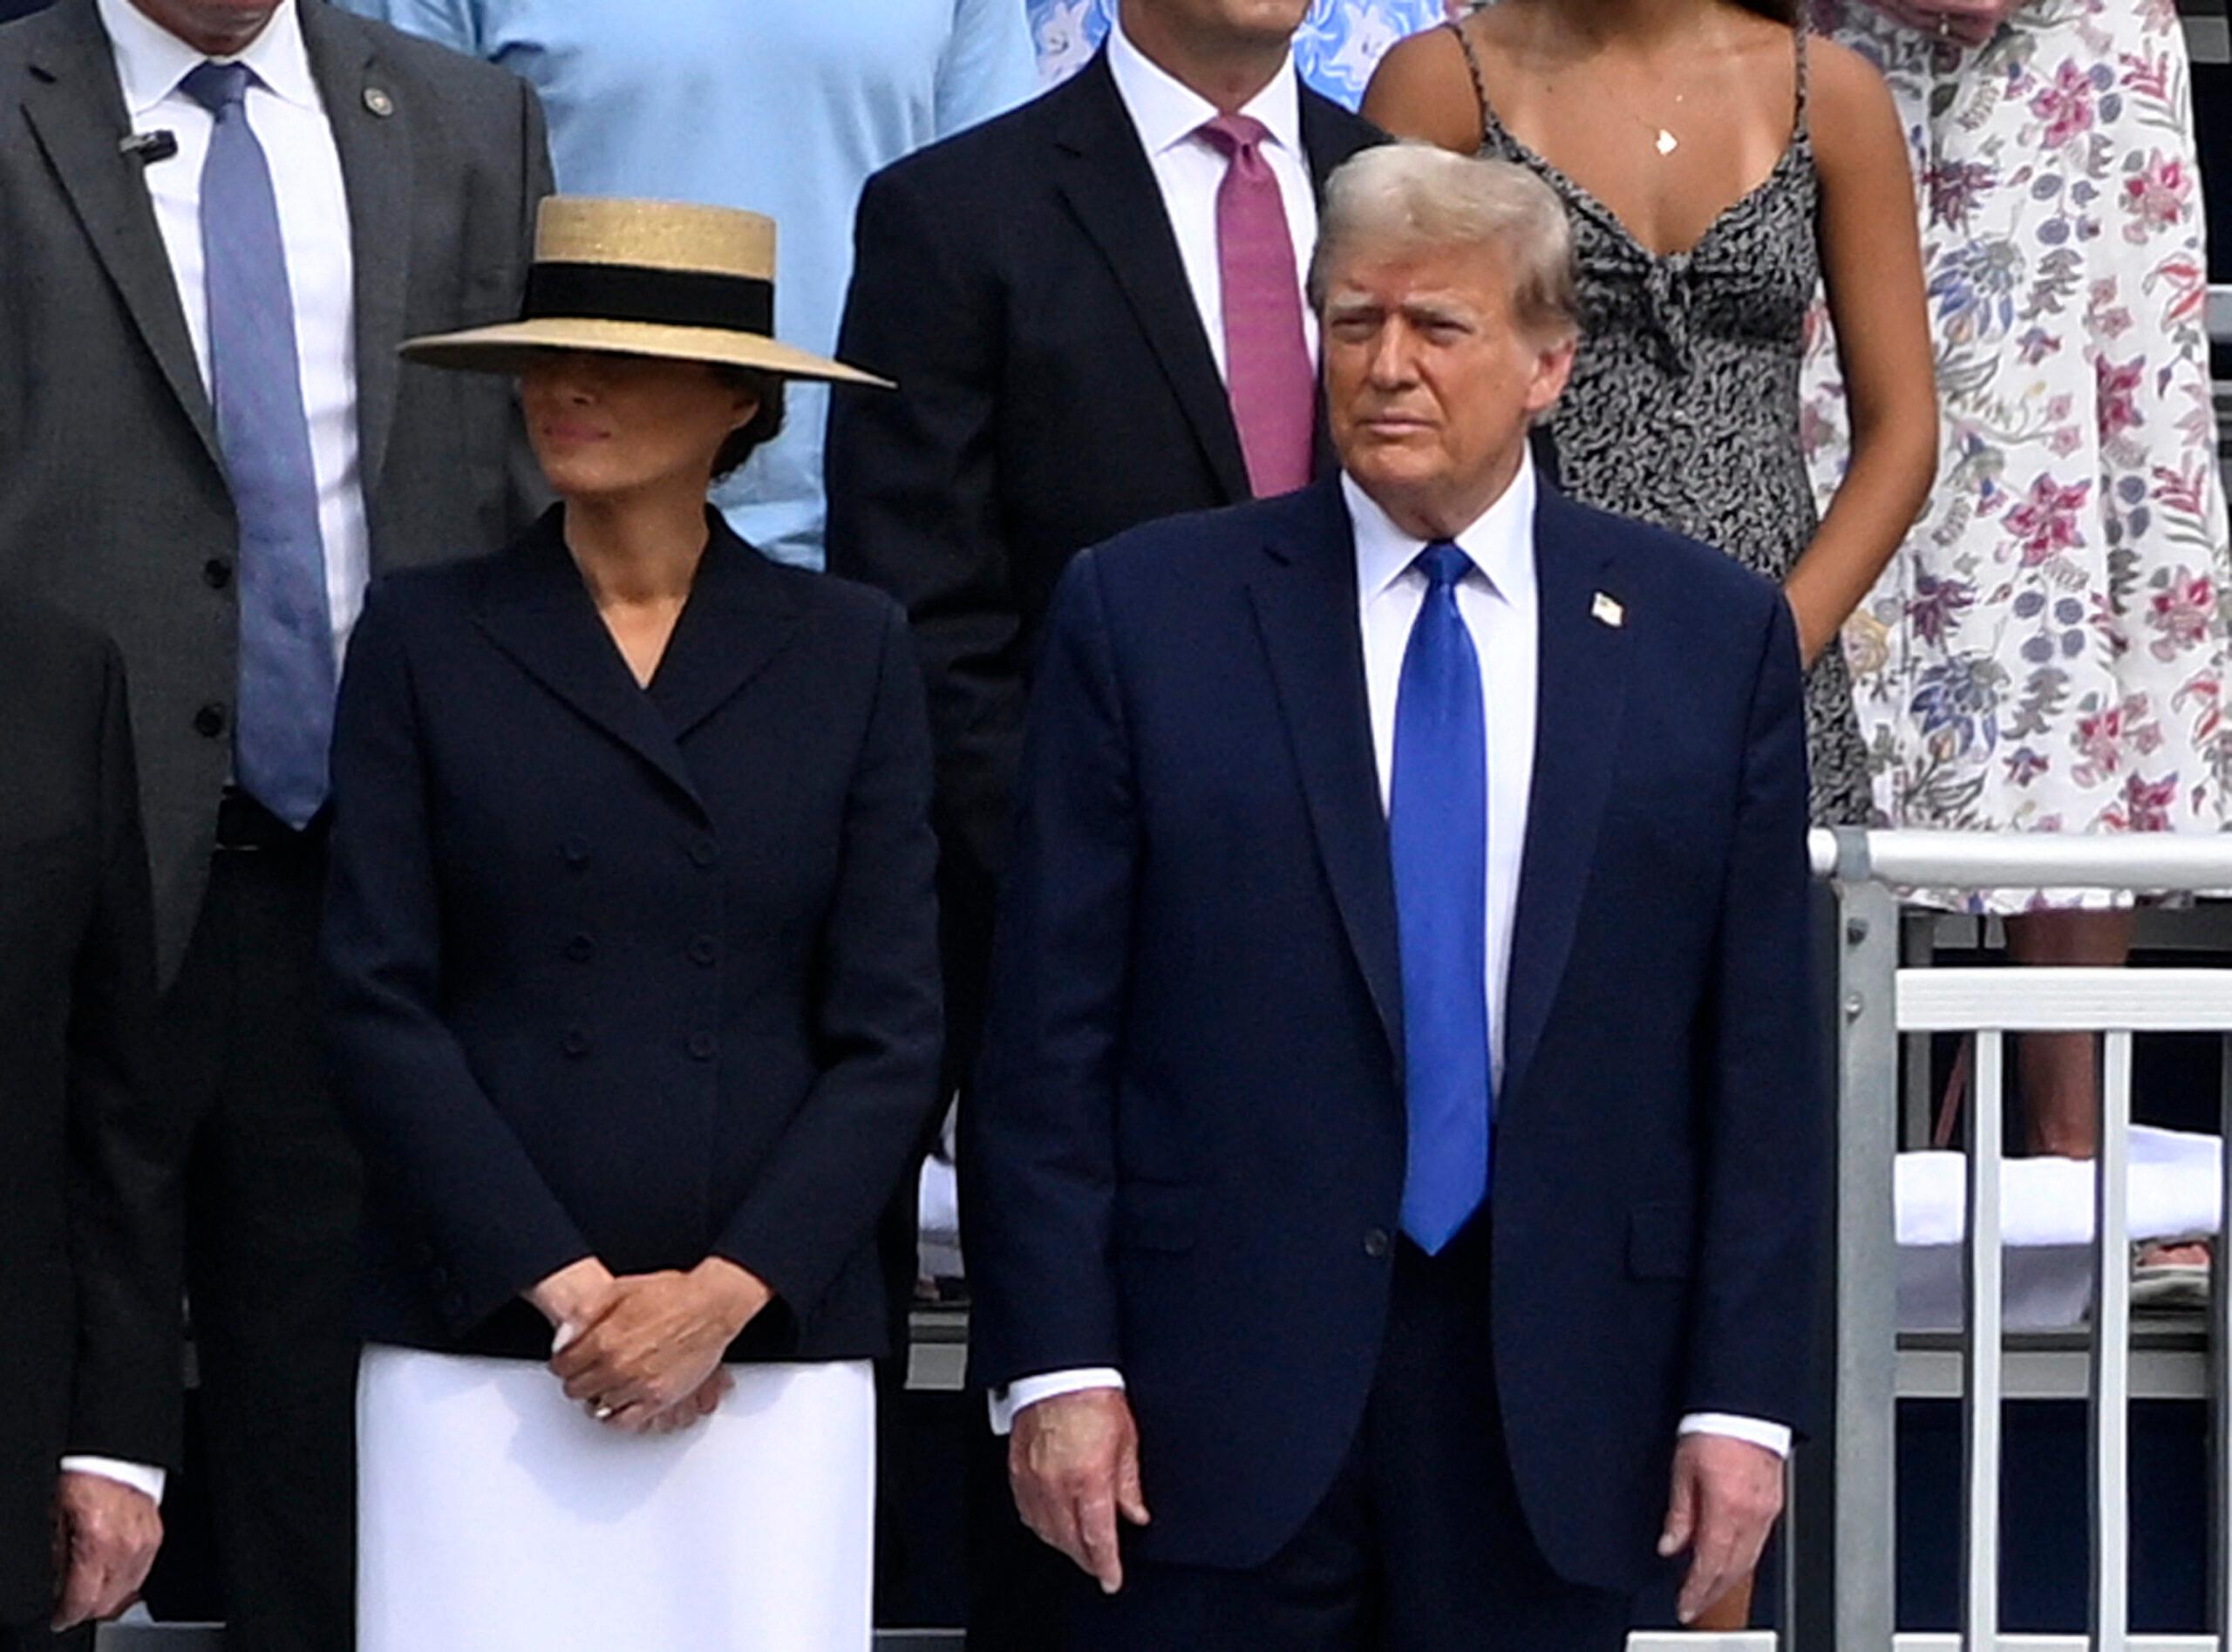 Barron Trump graduates from Oxbridge Academy with parents Donald Trump and Melania Trump watching in West Palm Beach, Florida.